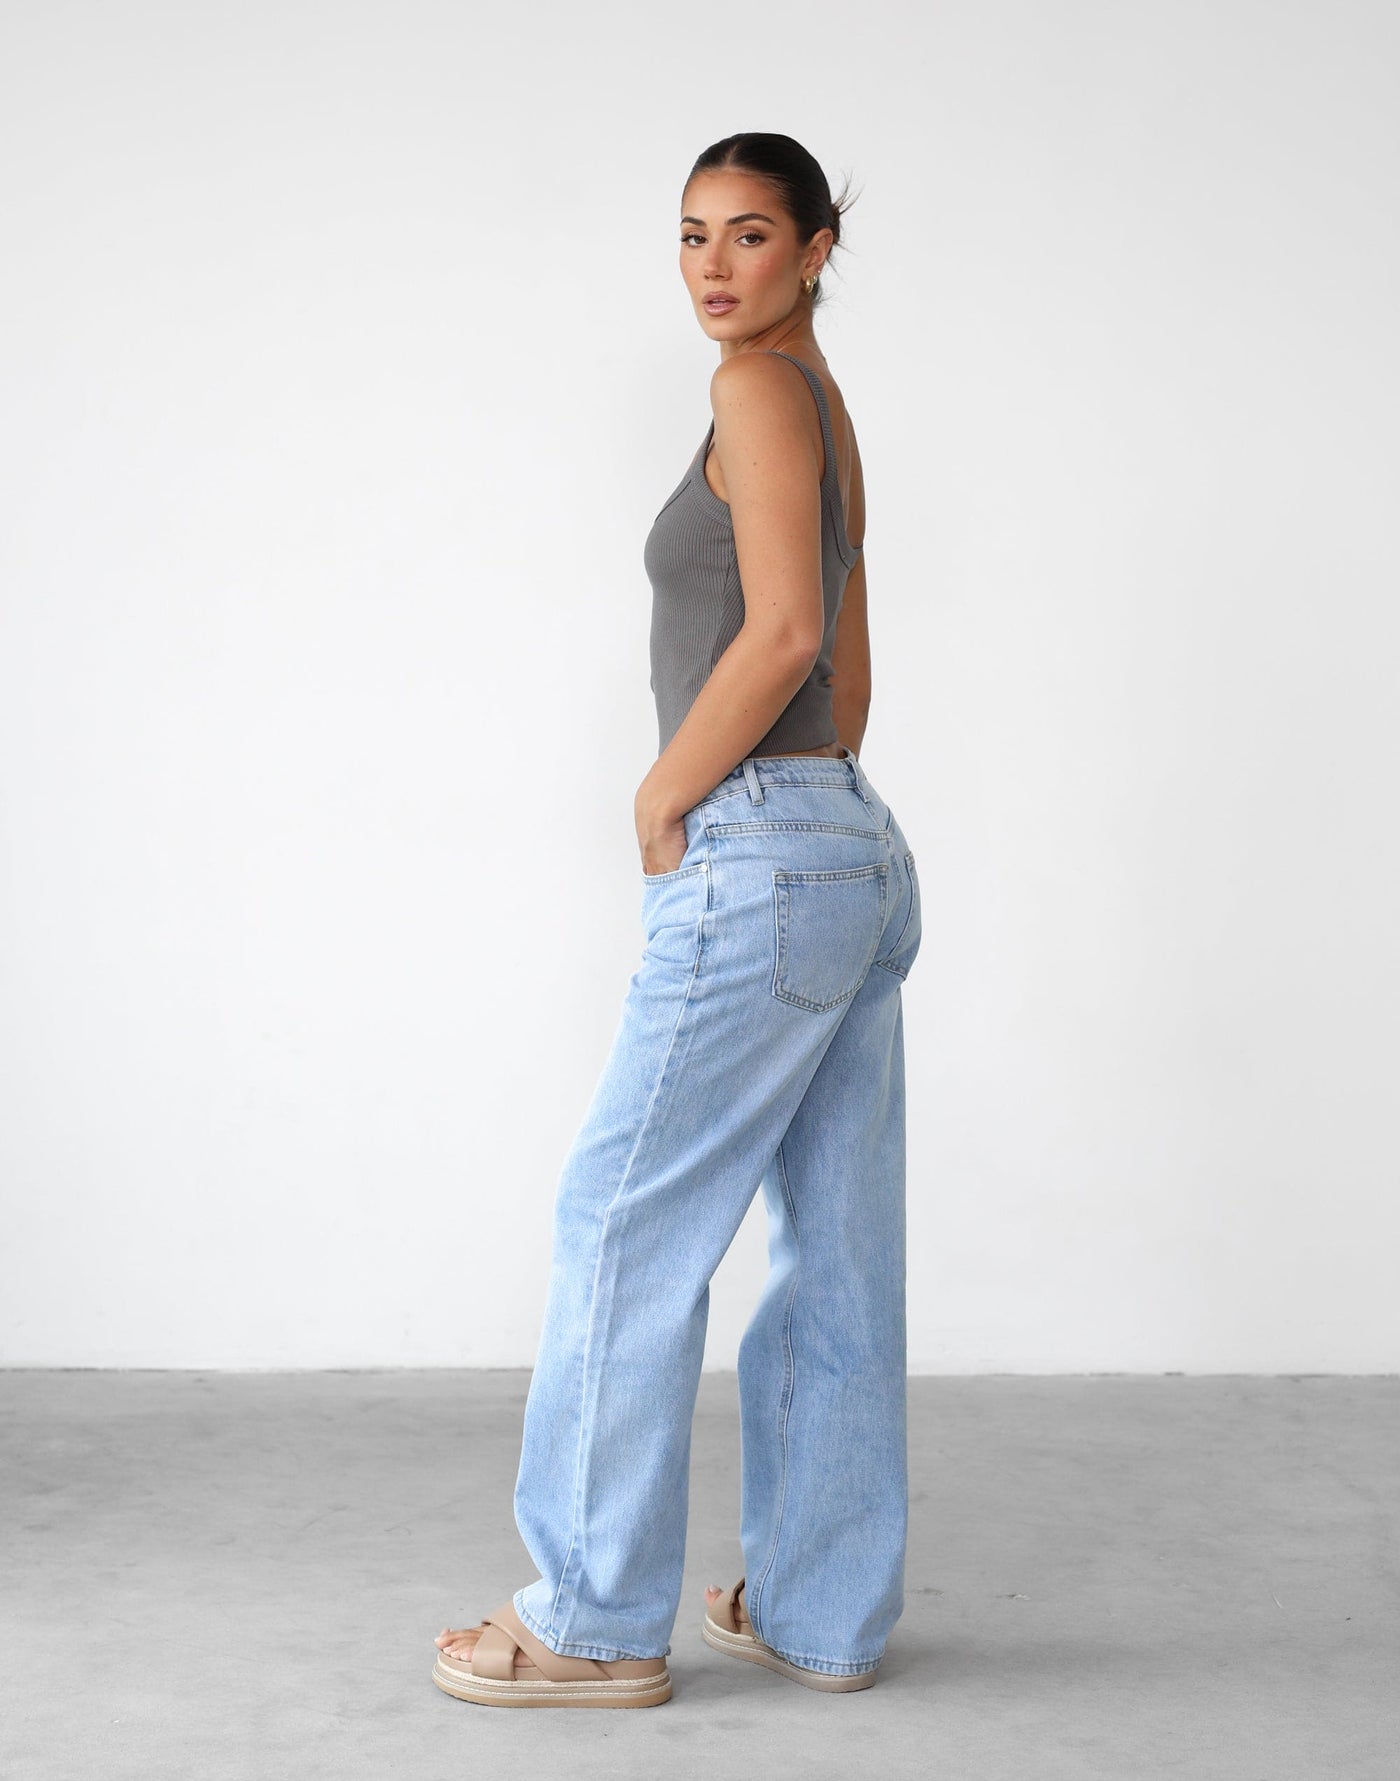 Easton Jeans (Blue Denim) - Low Waisted Relaxed Jeans - Women's Pants - Charcoal Clothing